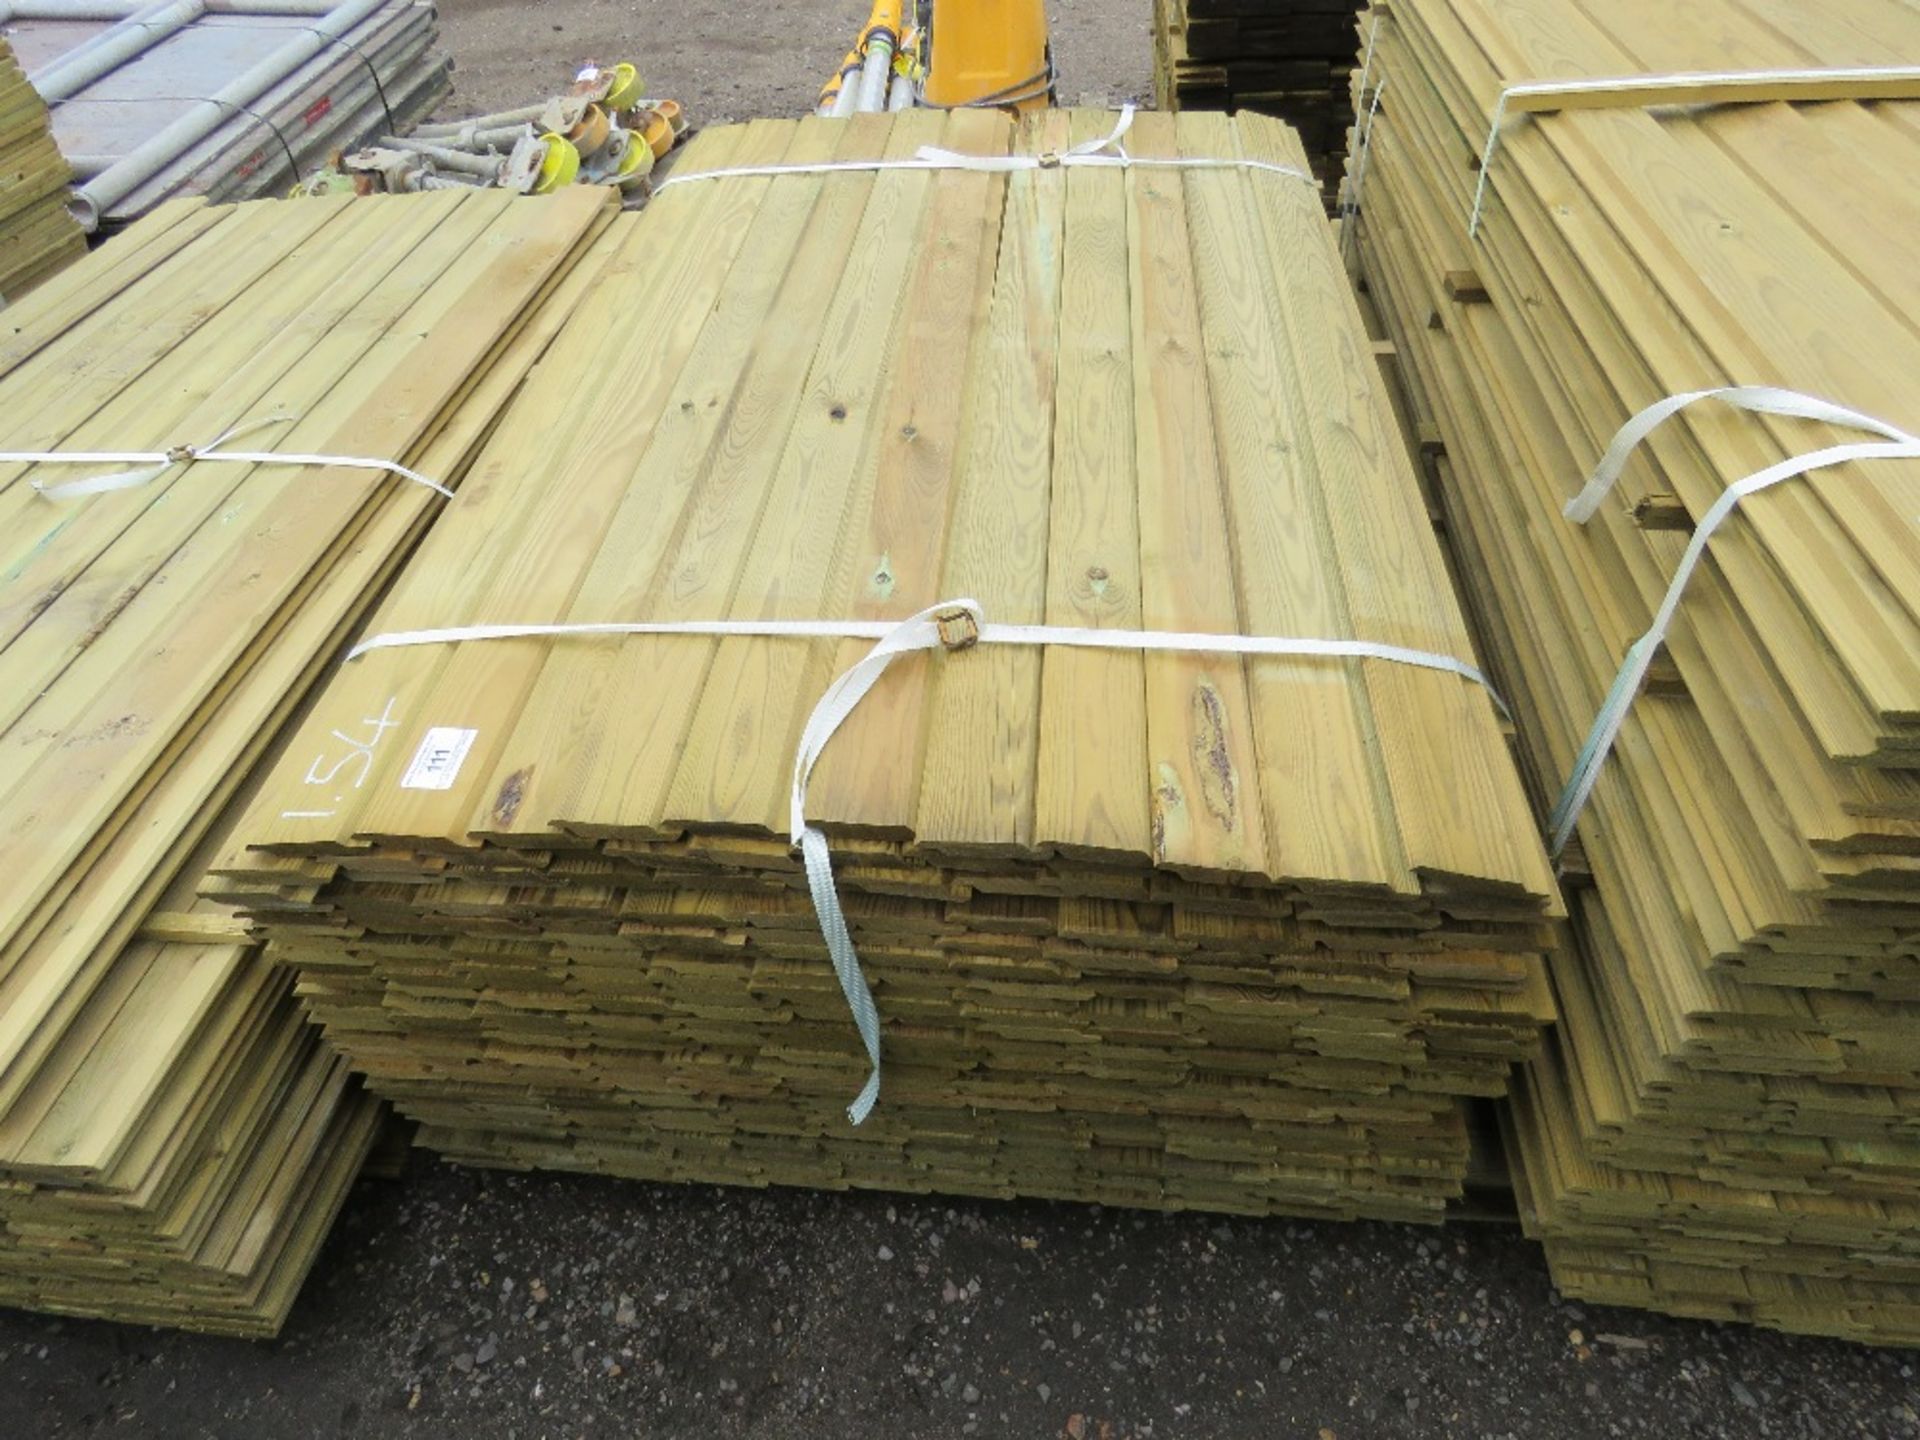 LARGE BUNDLE OF SHIPLAP TIMBER FENCE CLADDING @1.54M LENGTH X 10CM WIDE APPROX. - Image 2 of 2